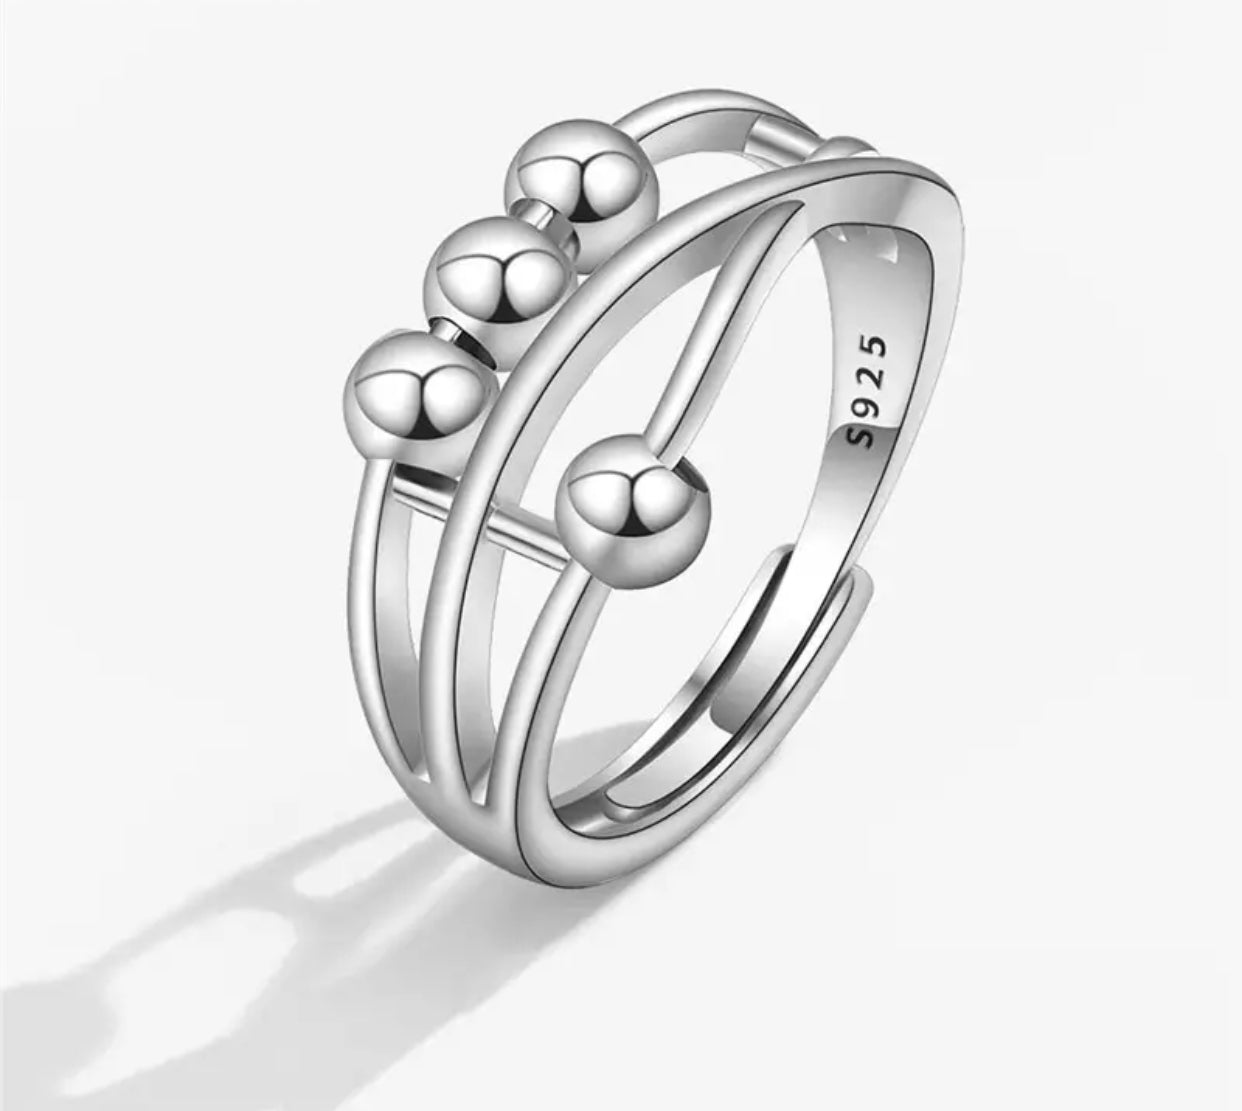 Ring - Adjustable Fidget Ring - 3 and 1 Bead